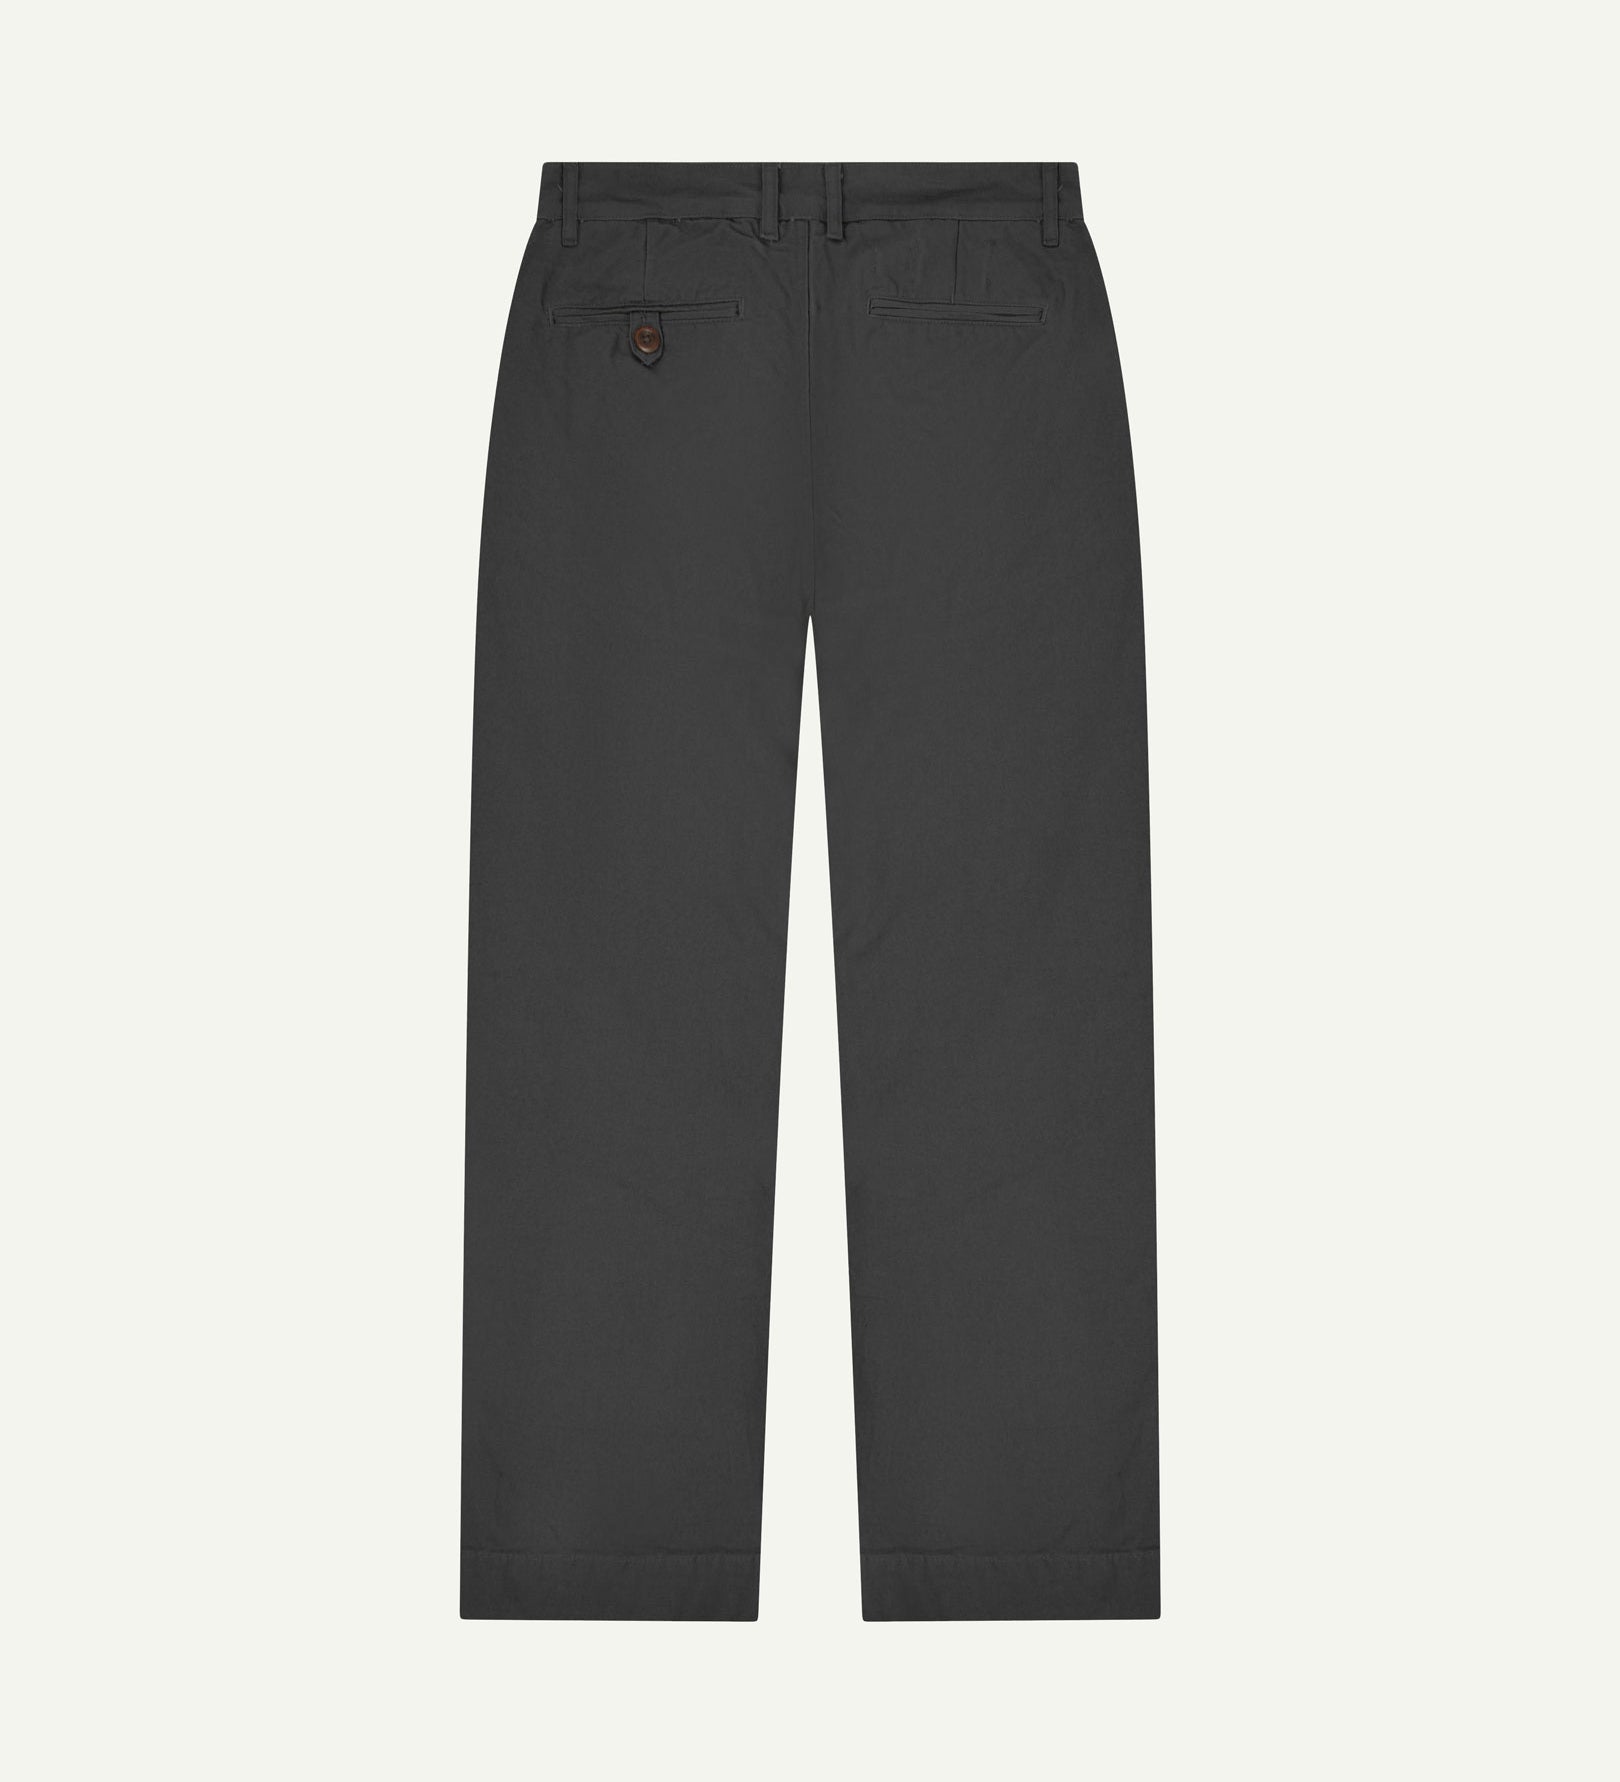 Back view of 5018 Uskees men's organic mid-weight cotton boat trousers in charcoal grey showing wide leg style and buttoned back pocket.